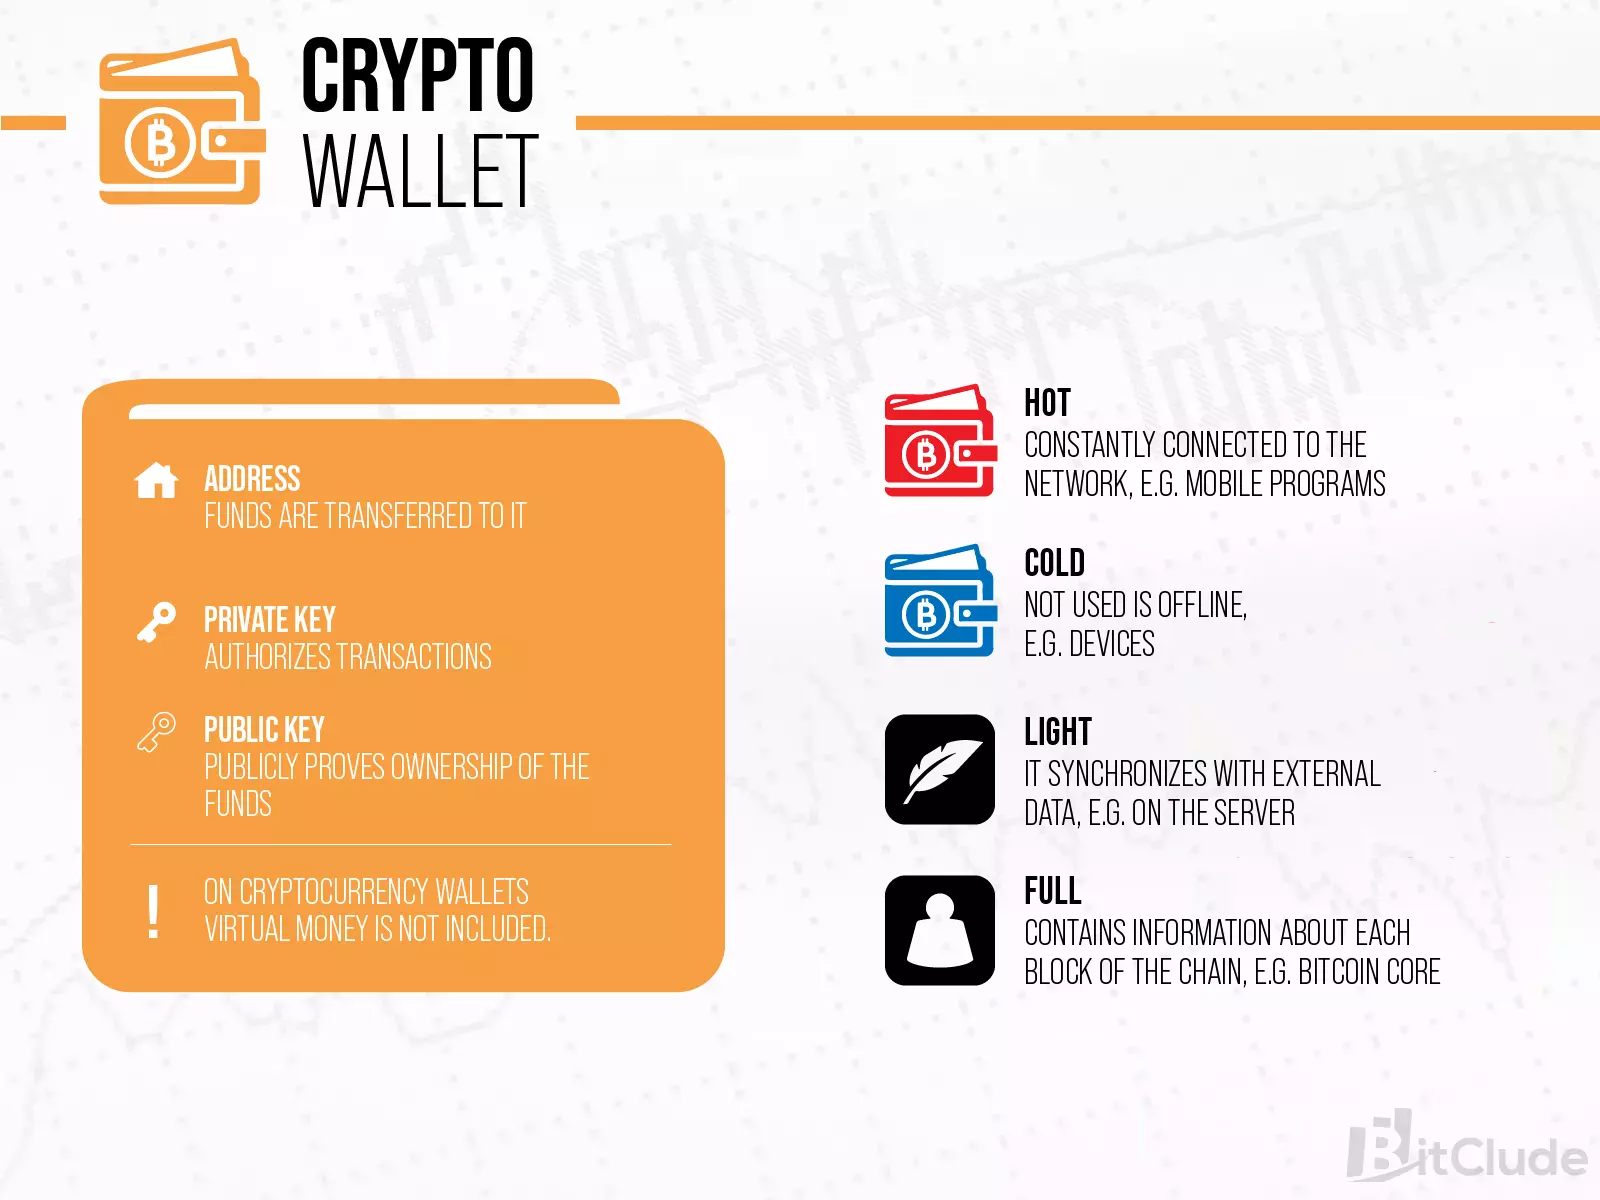 Cryptocurrency wallets are divided into warm, cold, light and full.